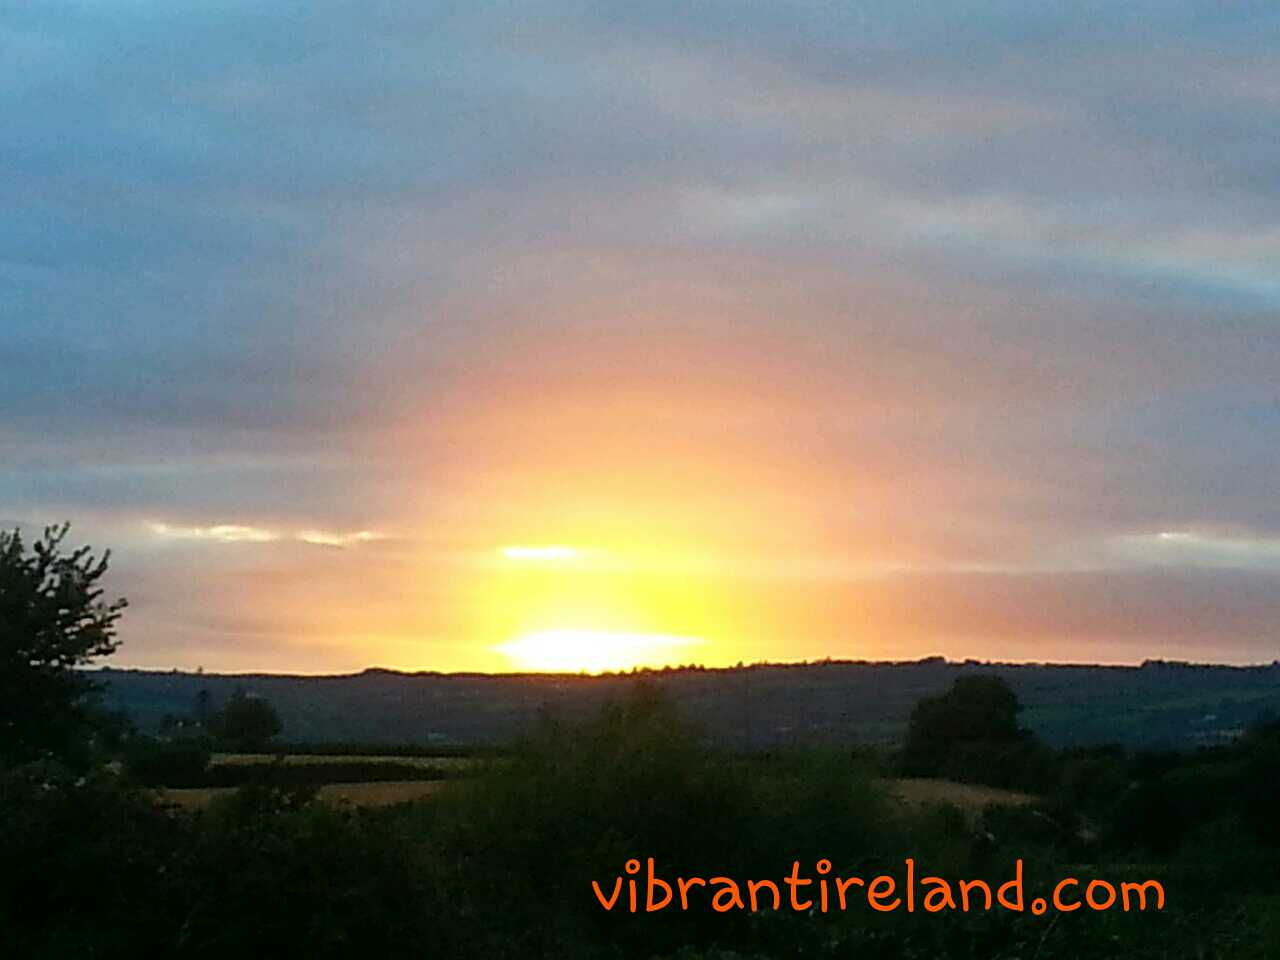 Vibrant Ireland!: Sunrises, Sunsets, & what to do next in the Sunny